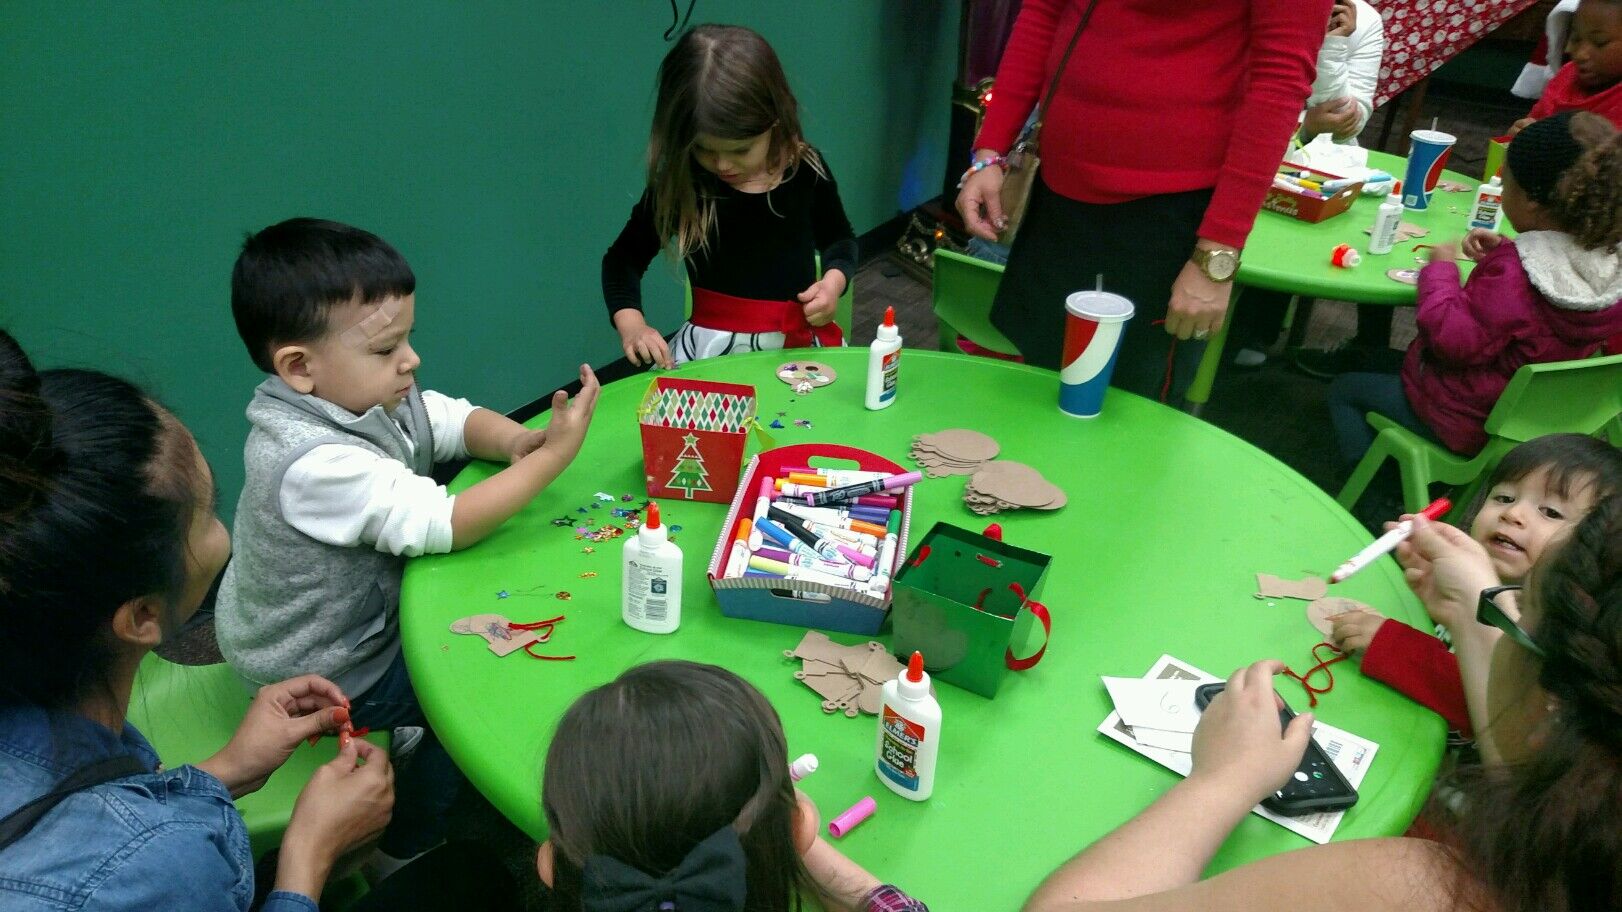 Children at a green table making Christmas ornaments.